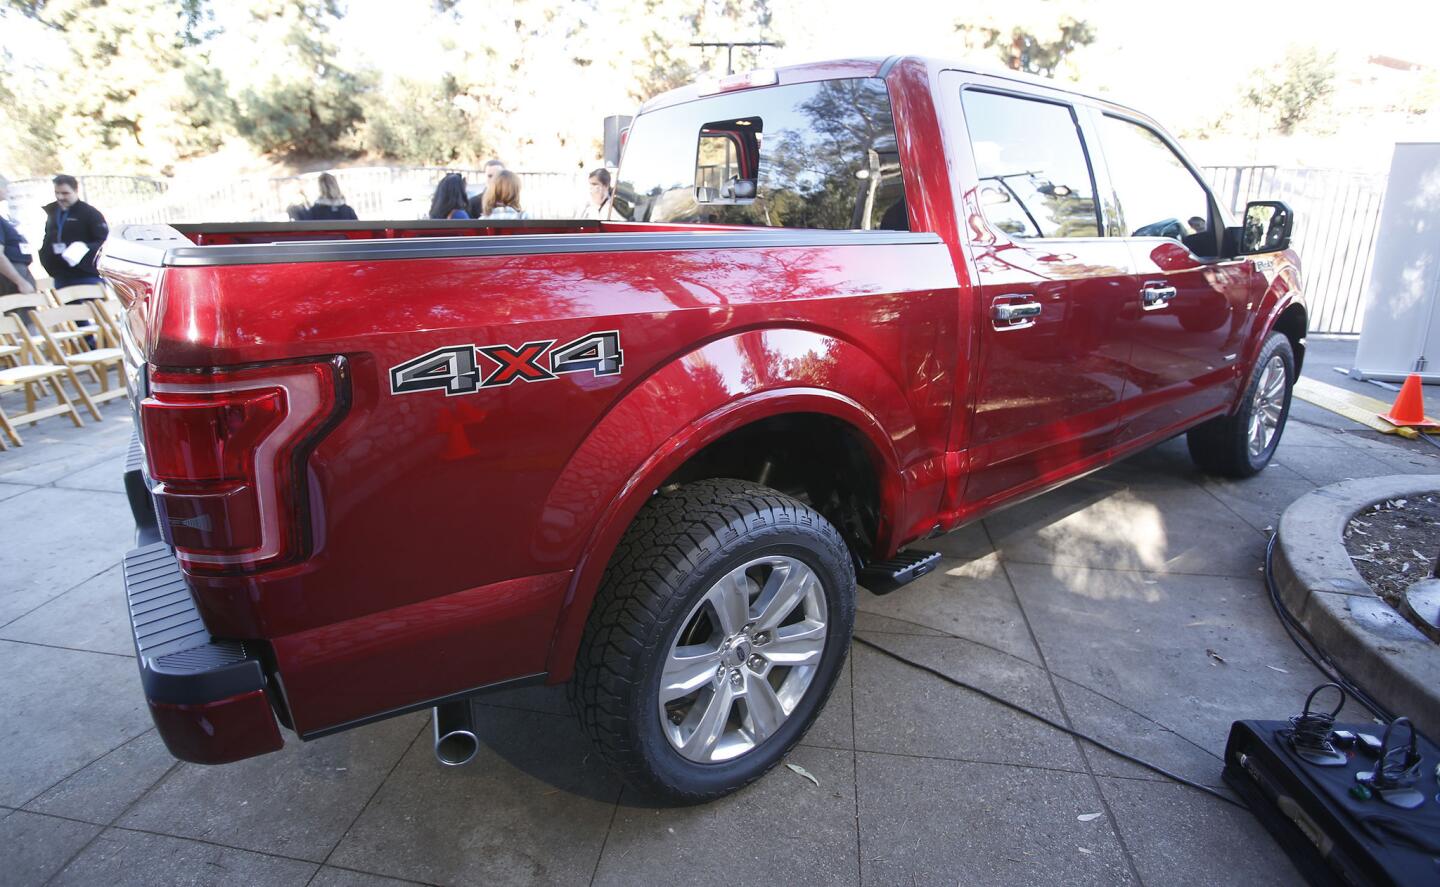 Ford's 2015 F-150